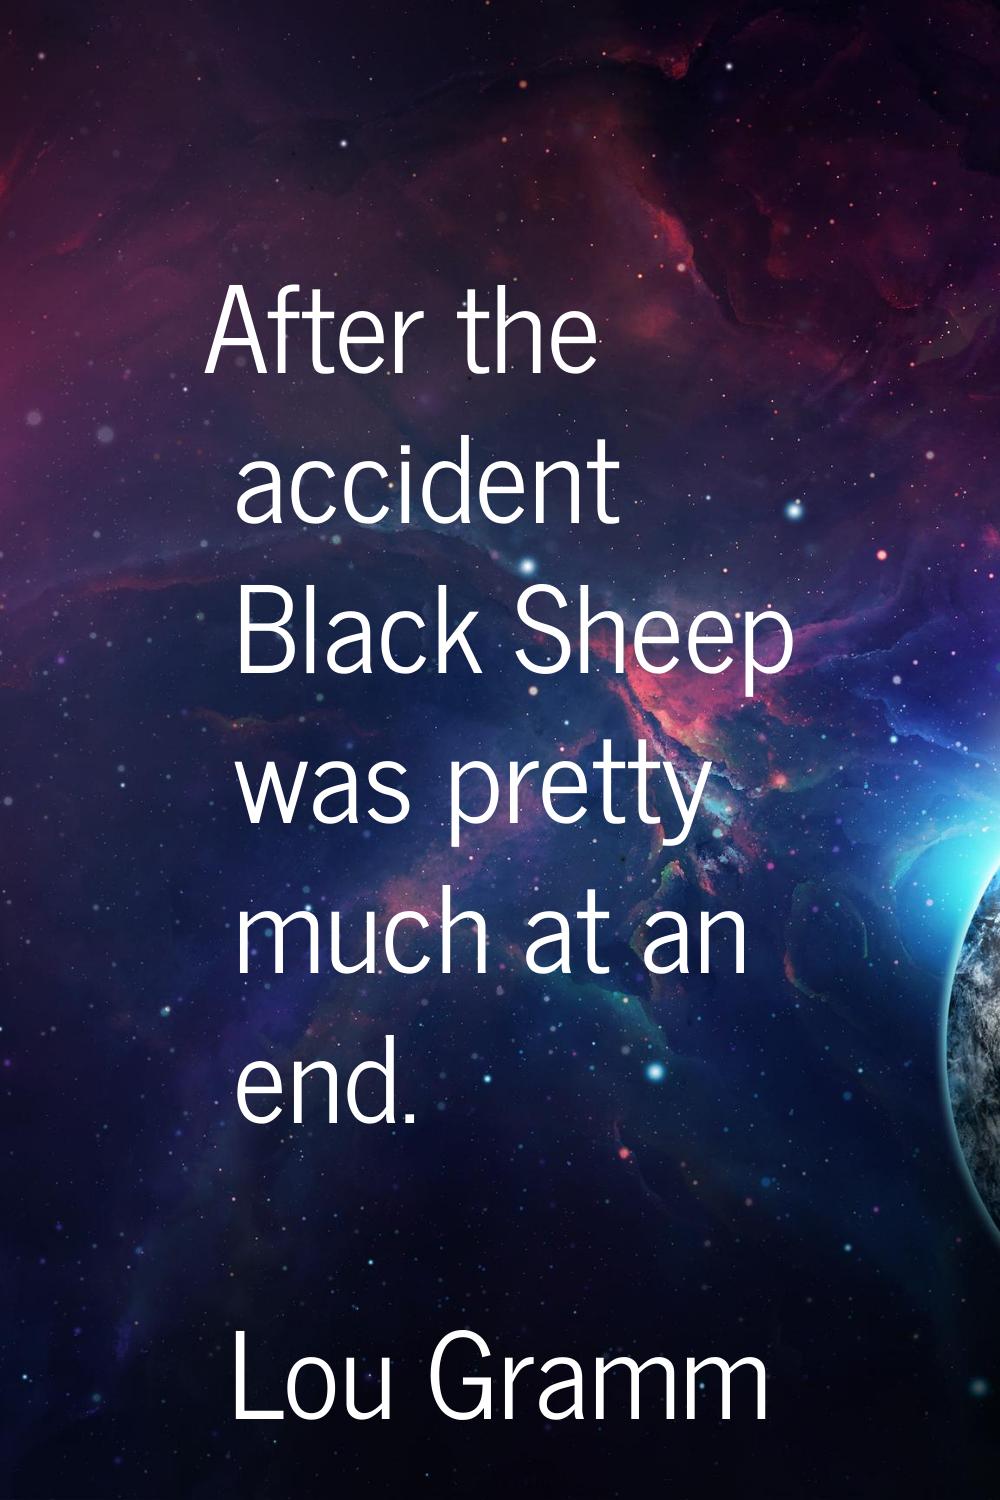 After the accident Black Sheep was pretty much at an end.